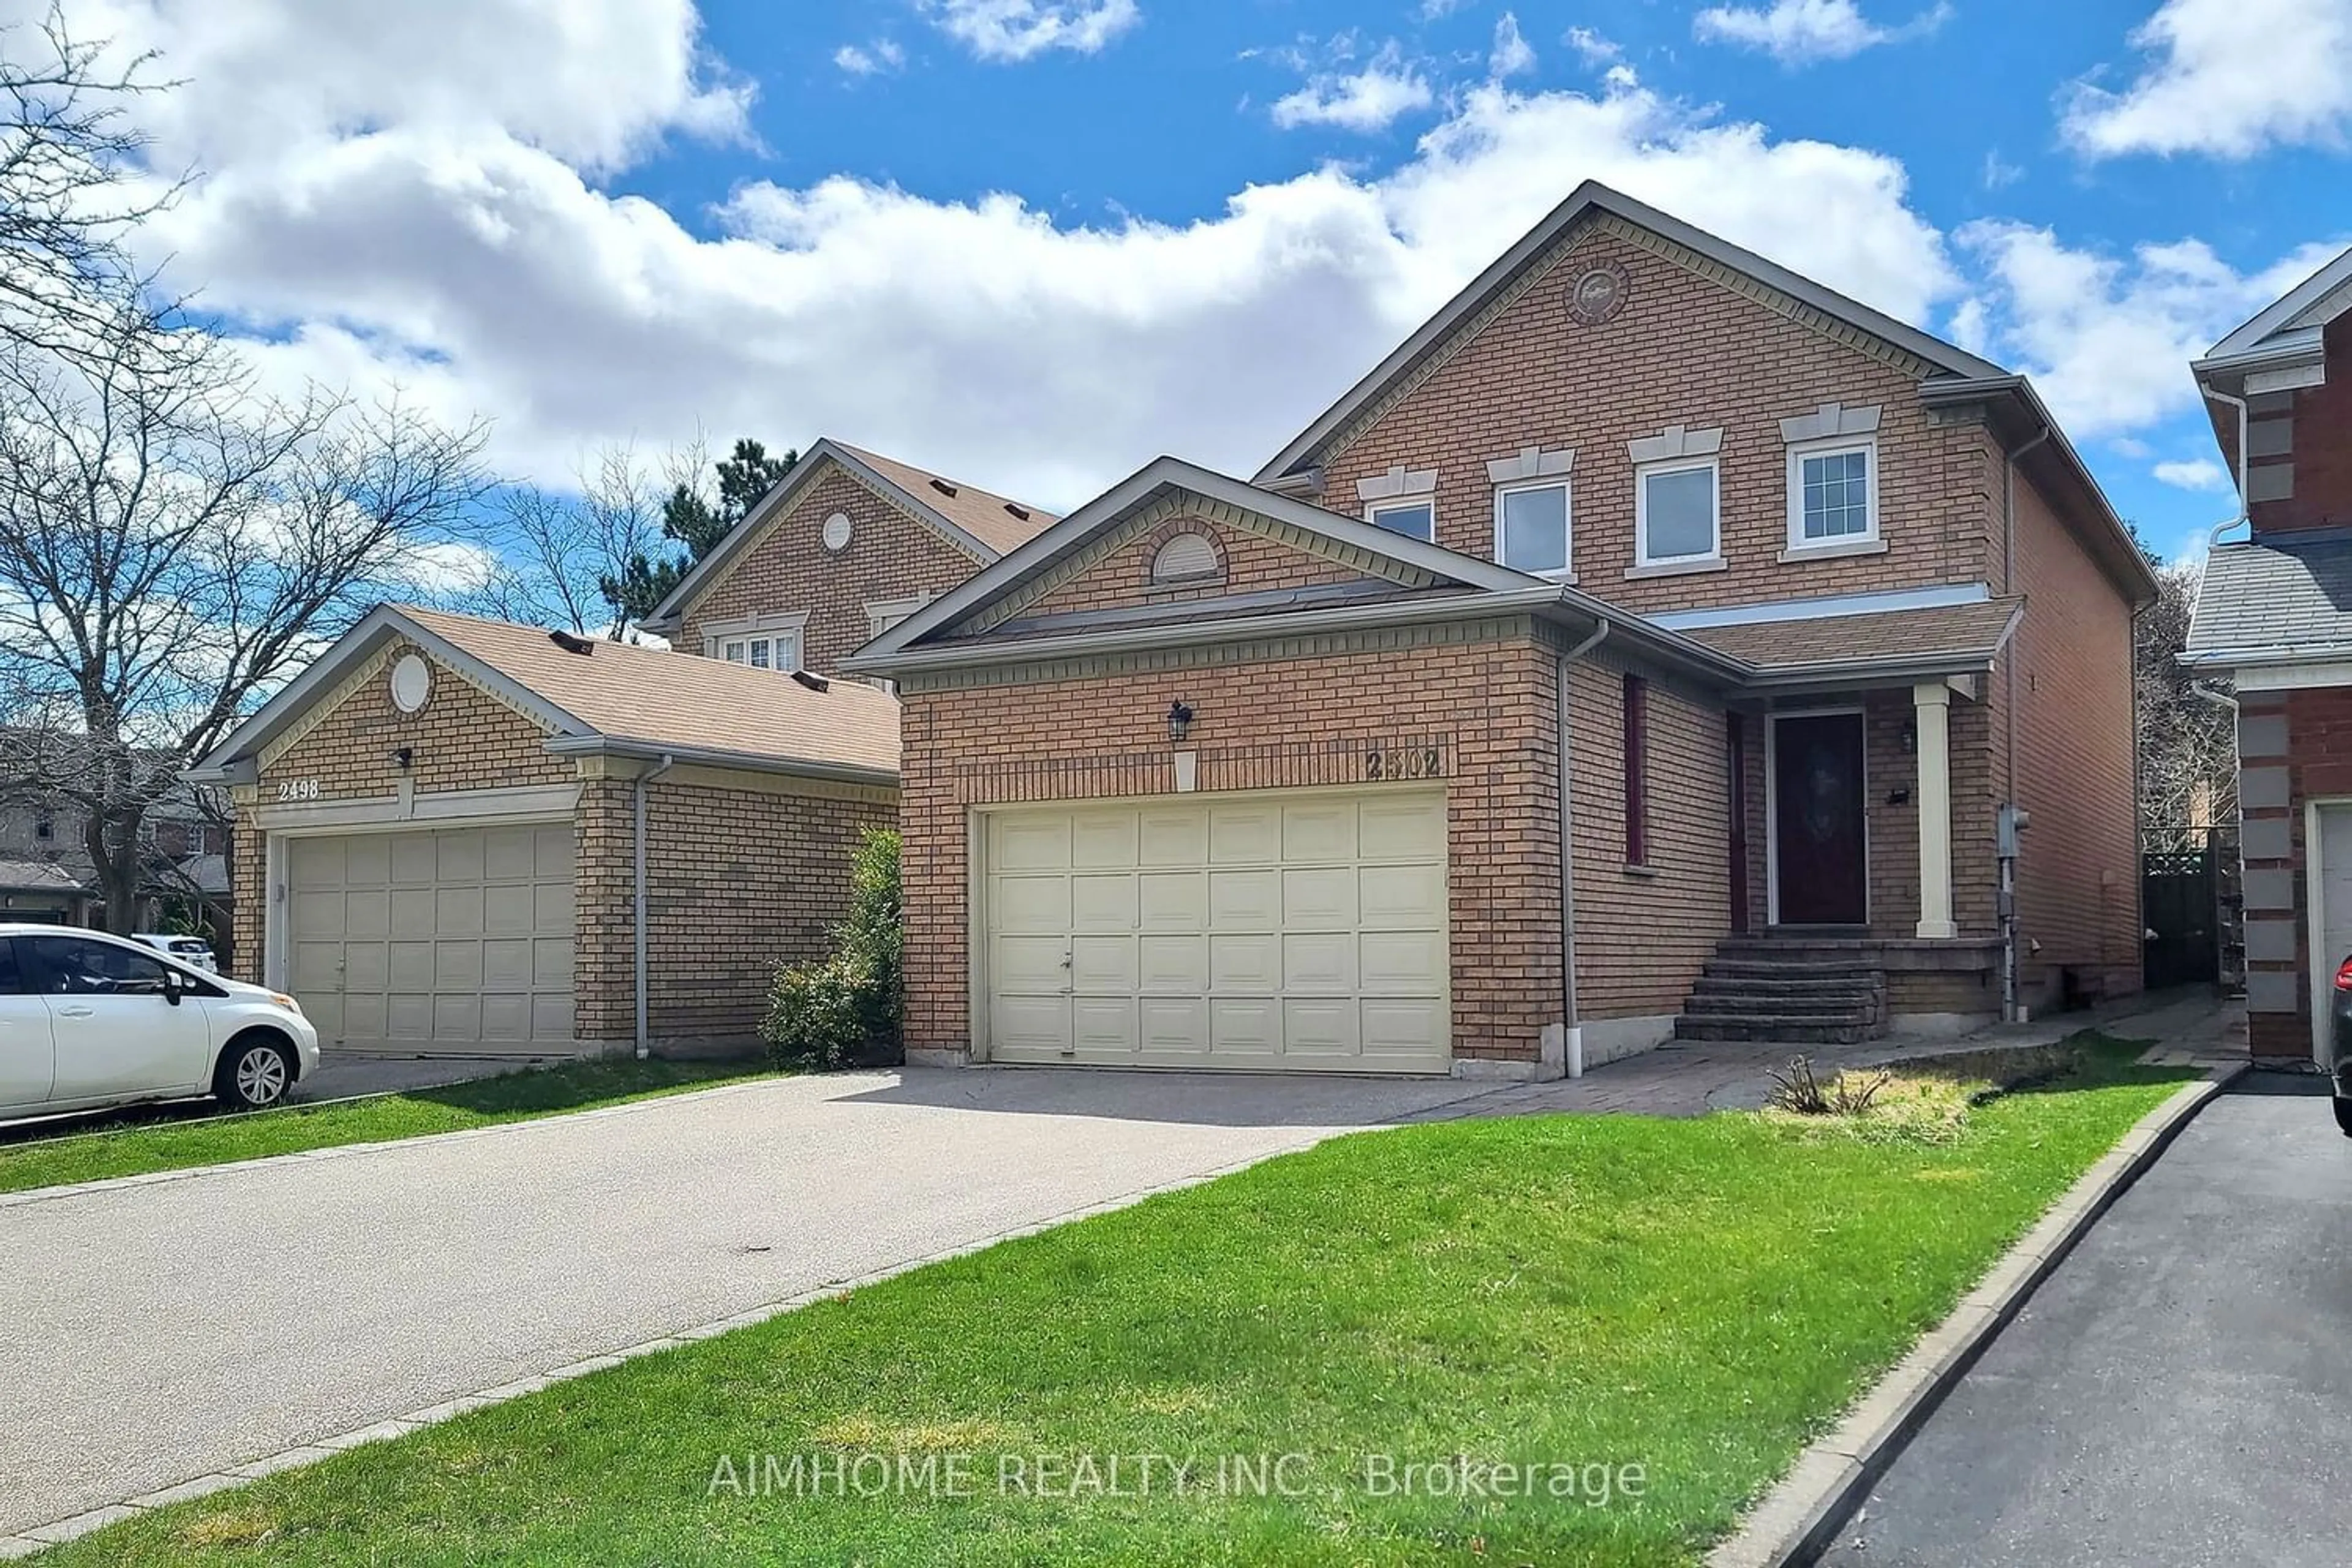 Frontside or backside of a home for 2502 Burnford Tr, Mississauga Ontario L5M 5E4